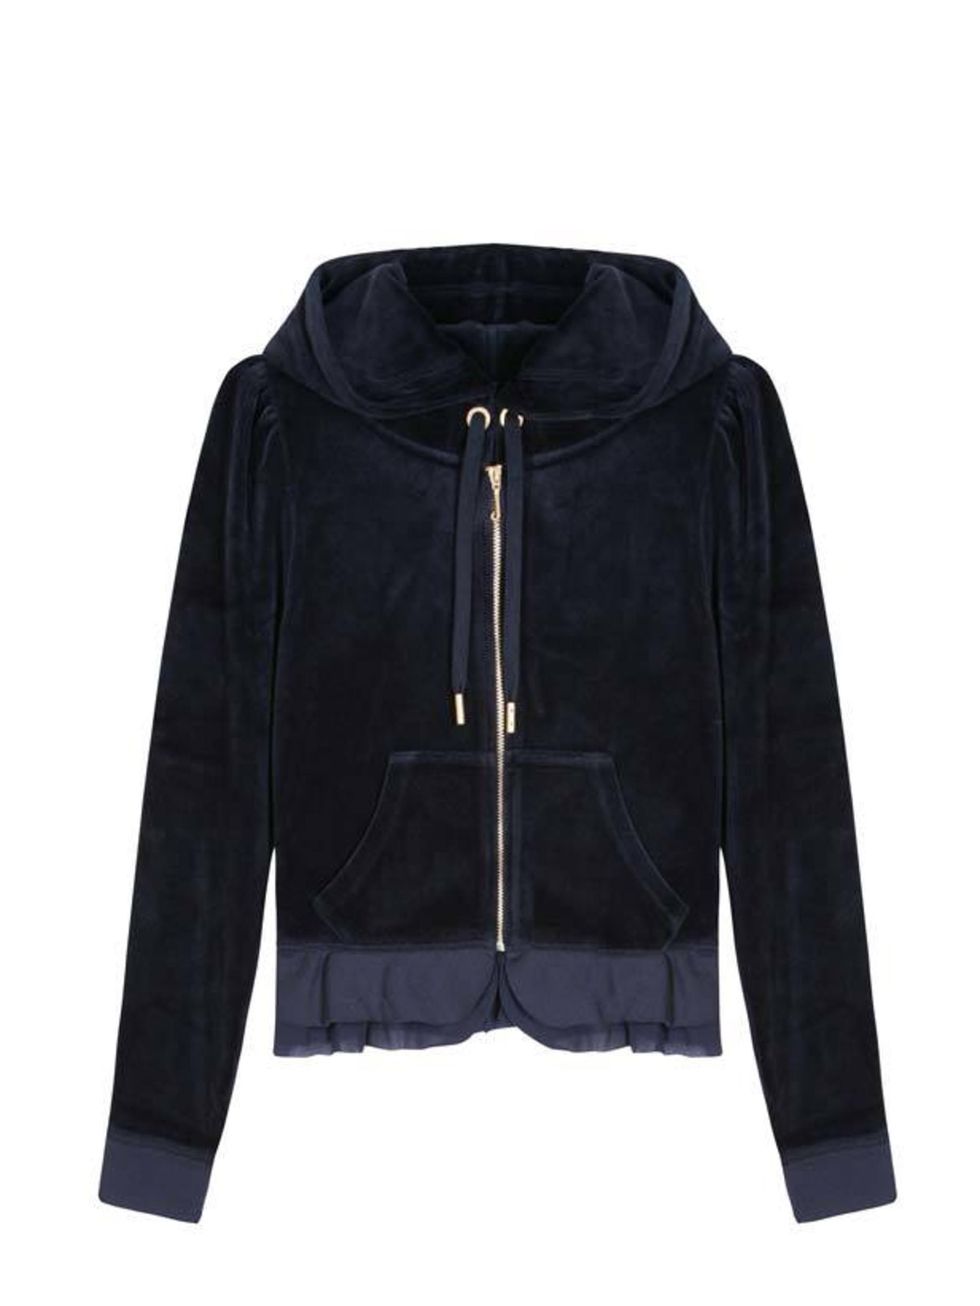 <p>Juicy Couture Love Plumes hoodie, £106.33, at <a href="http://www.mytheresa.com/shop/LOVE-PLUMES-HOODIE-p-15095.html">my-theresa.com</a></p>